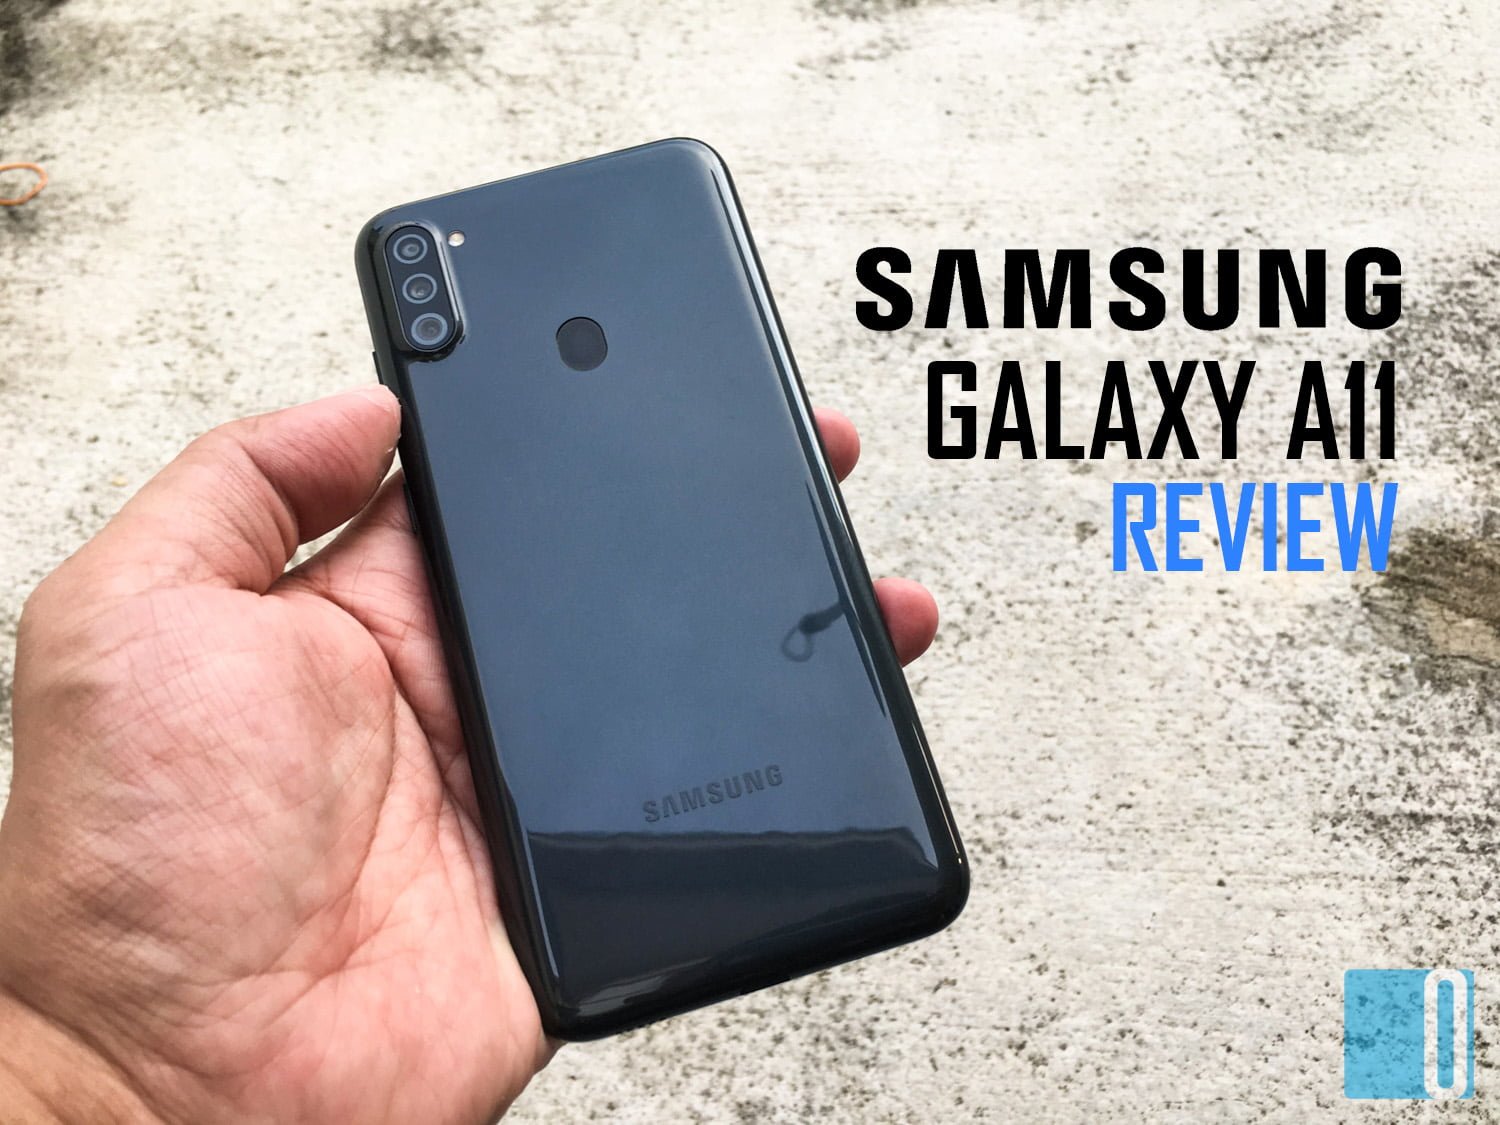 Samsung Galaxy A11 Review